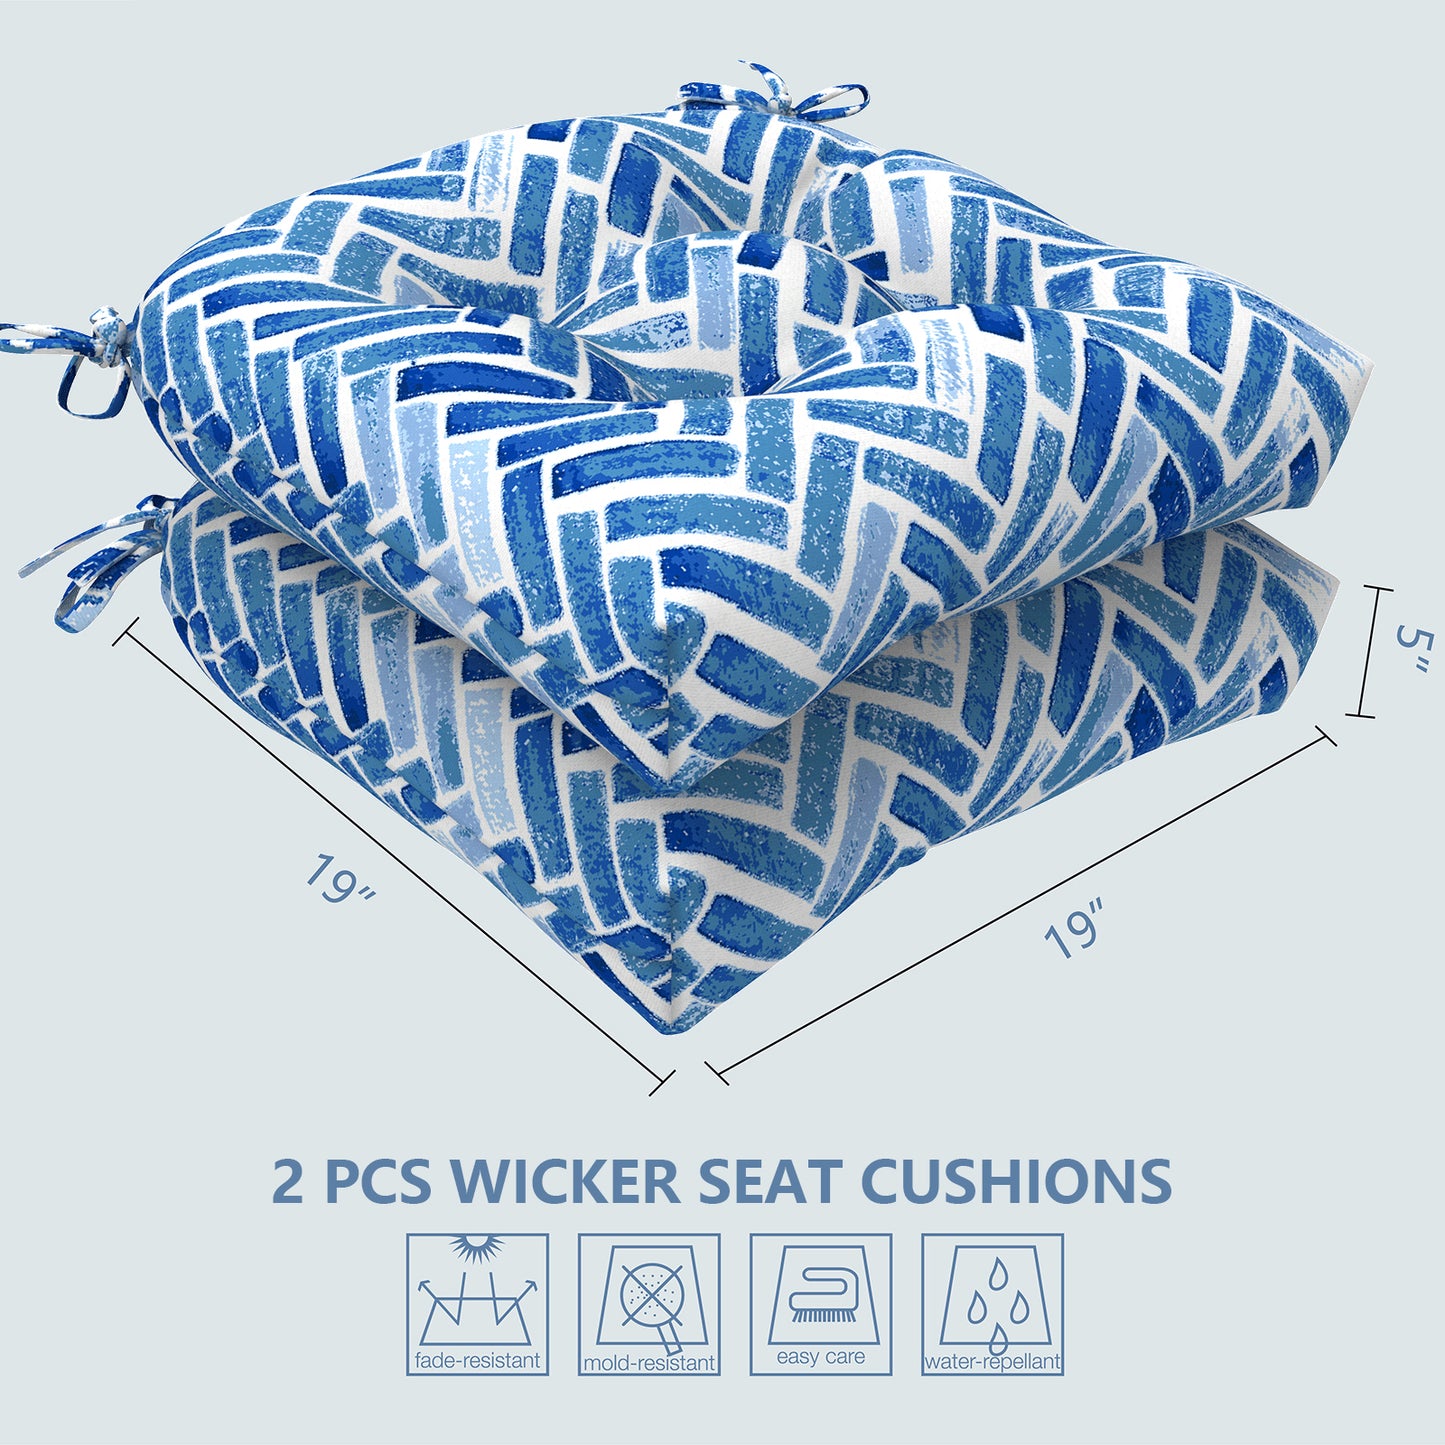 Melody Elephant Patio Wicker Chair Cushions, All Weather Outdoor Tufted Chair Pads Pack of 2, 19 x 19 x 5 Inch U-Shaped Seat Cushions of Garden Furniture Decoration, Blue Bricks